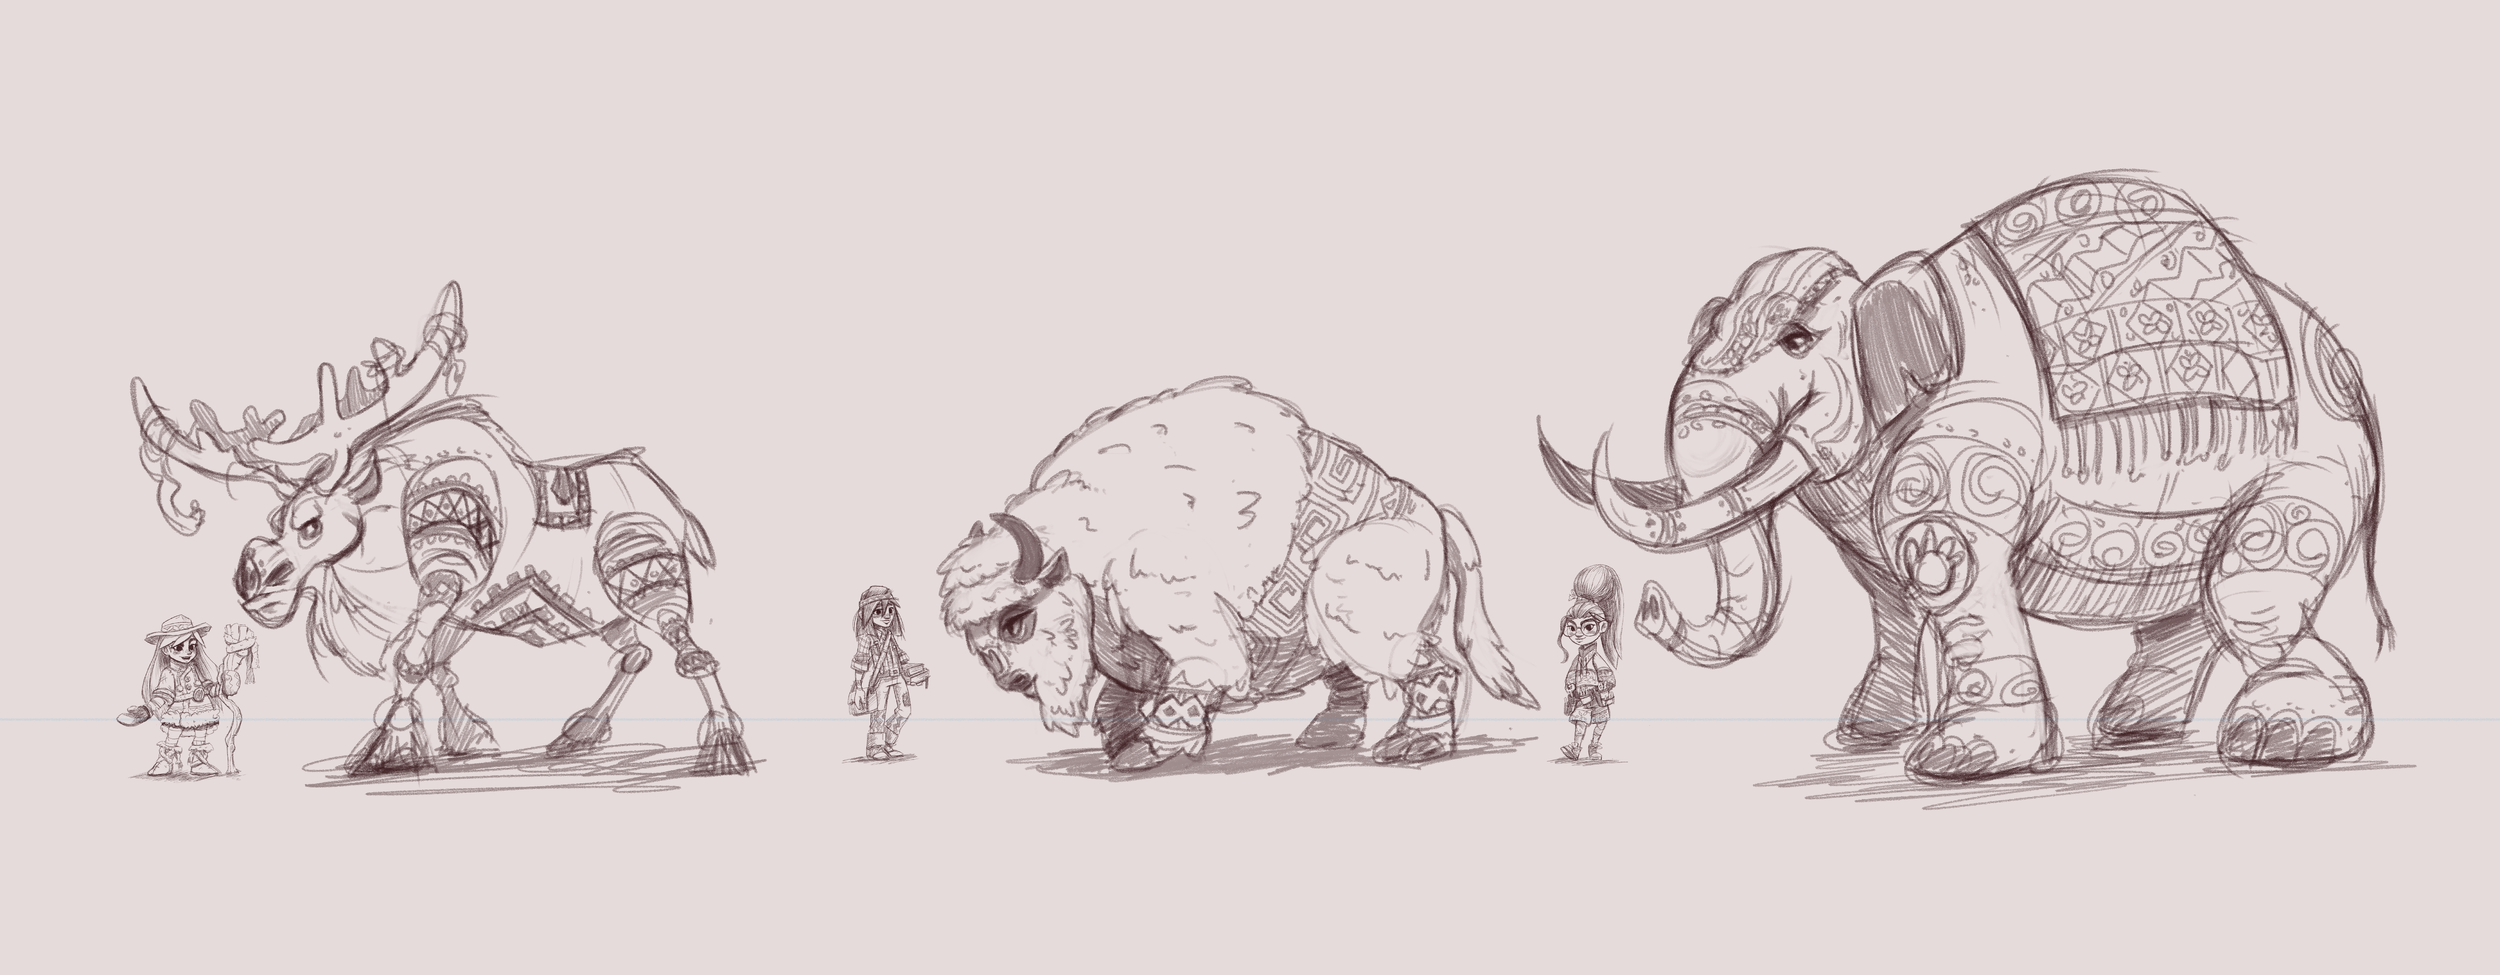 Storybook_Guardian_Concepts_WIP2.png